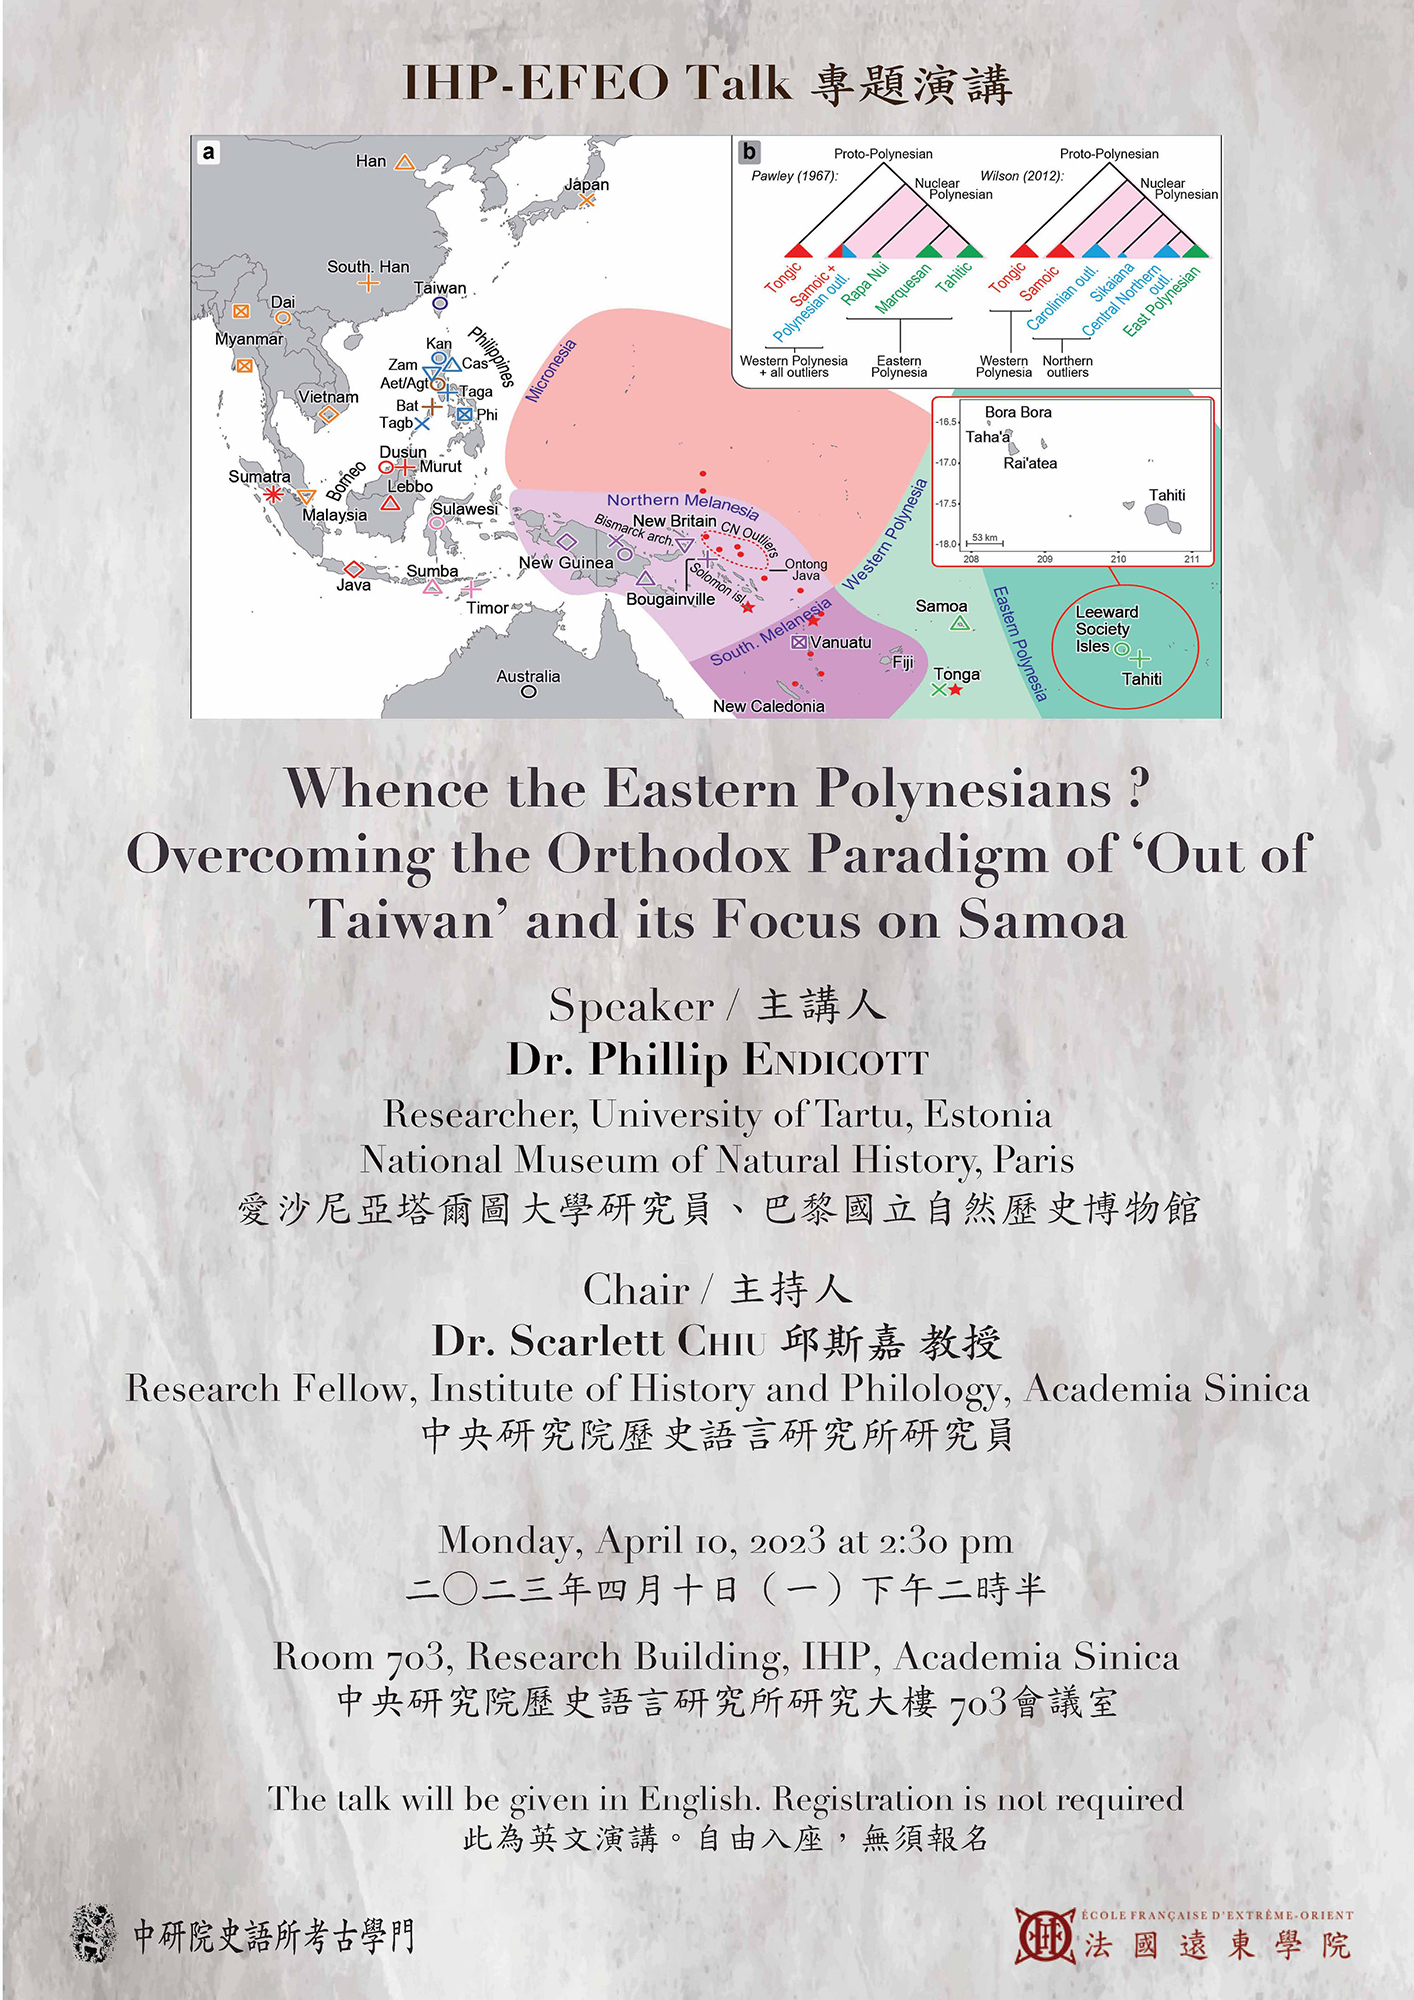 Whence the Eastern Polynesians ? Overcoming the Orthodox Paradigm of ‘Out of Taiwan’ and its Focus on Samoa